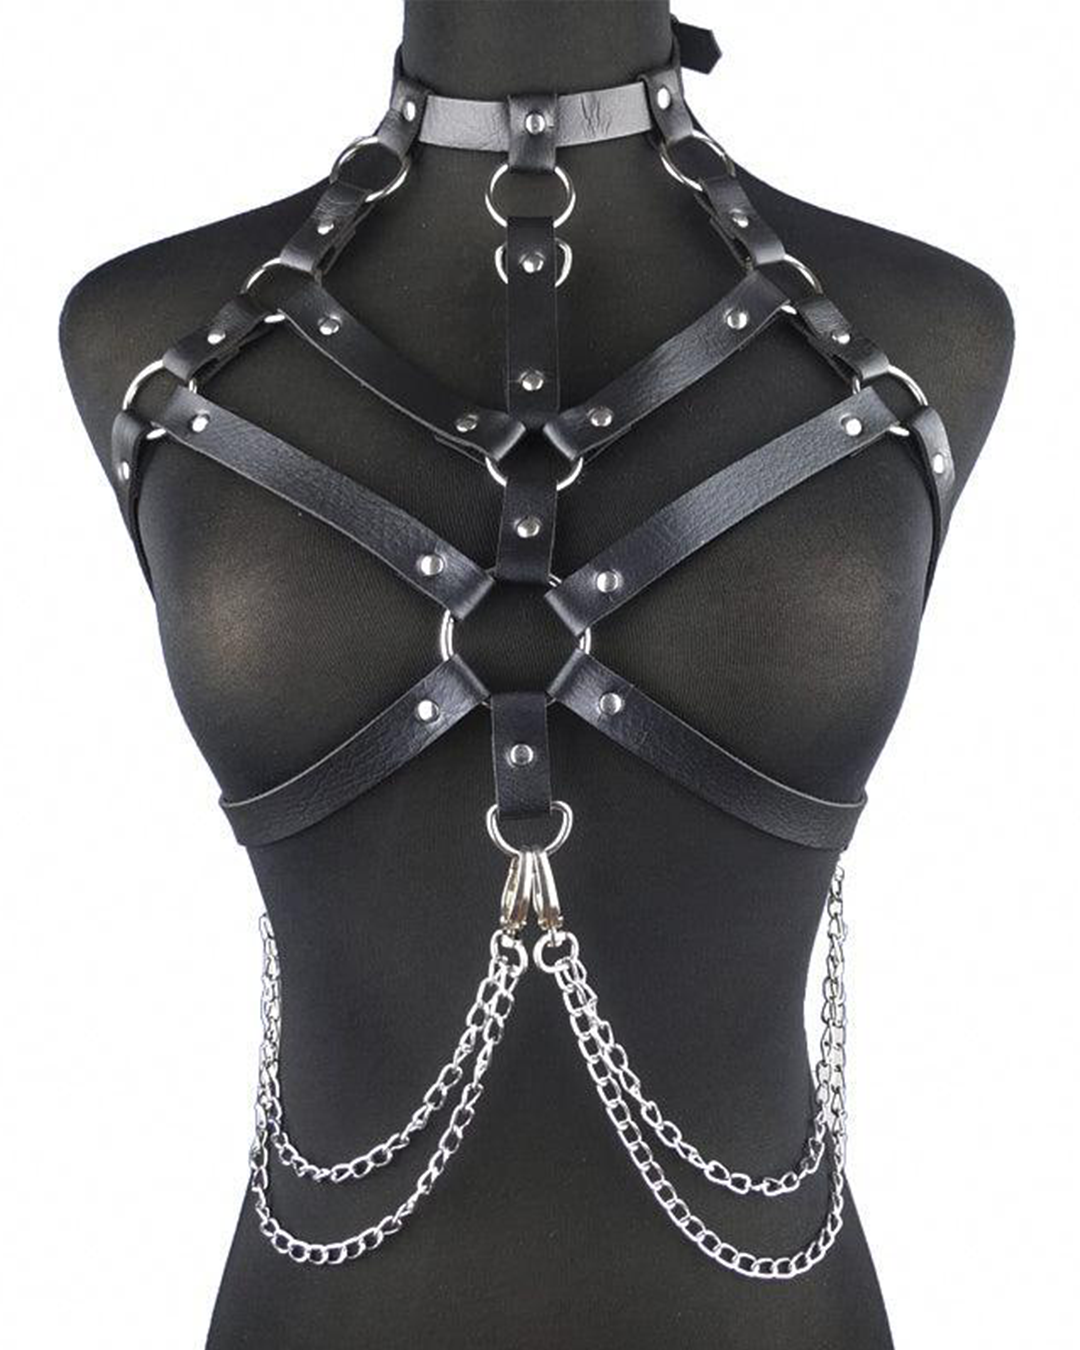 Chest Harness 830